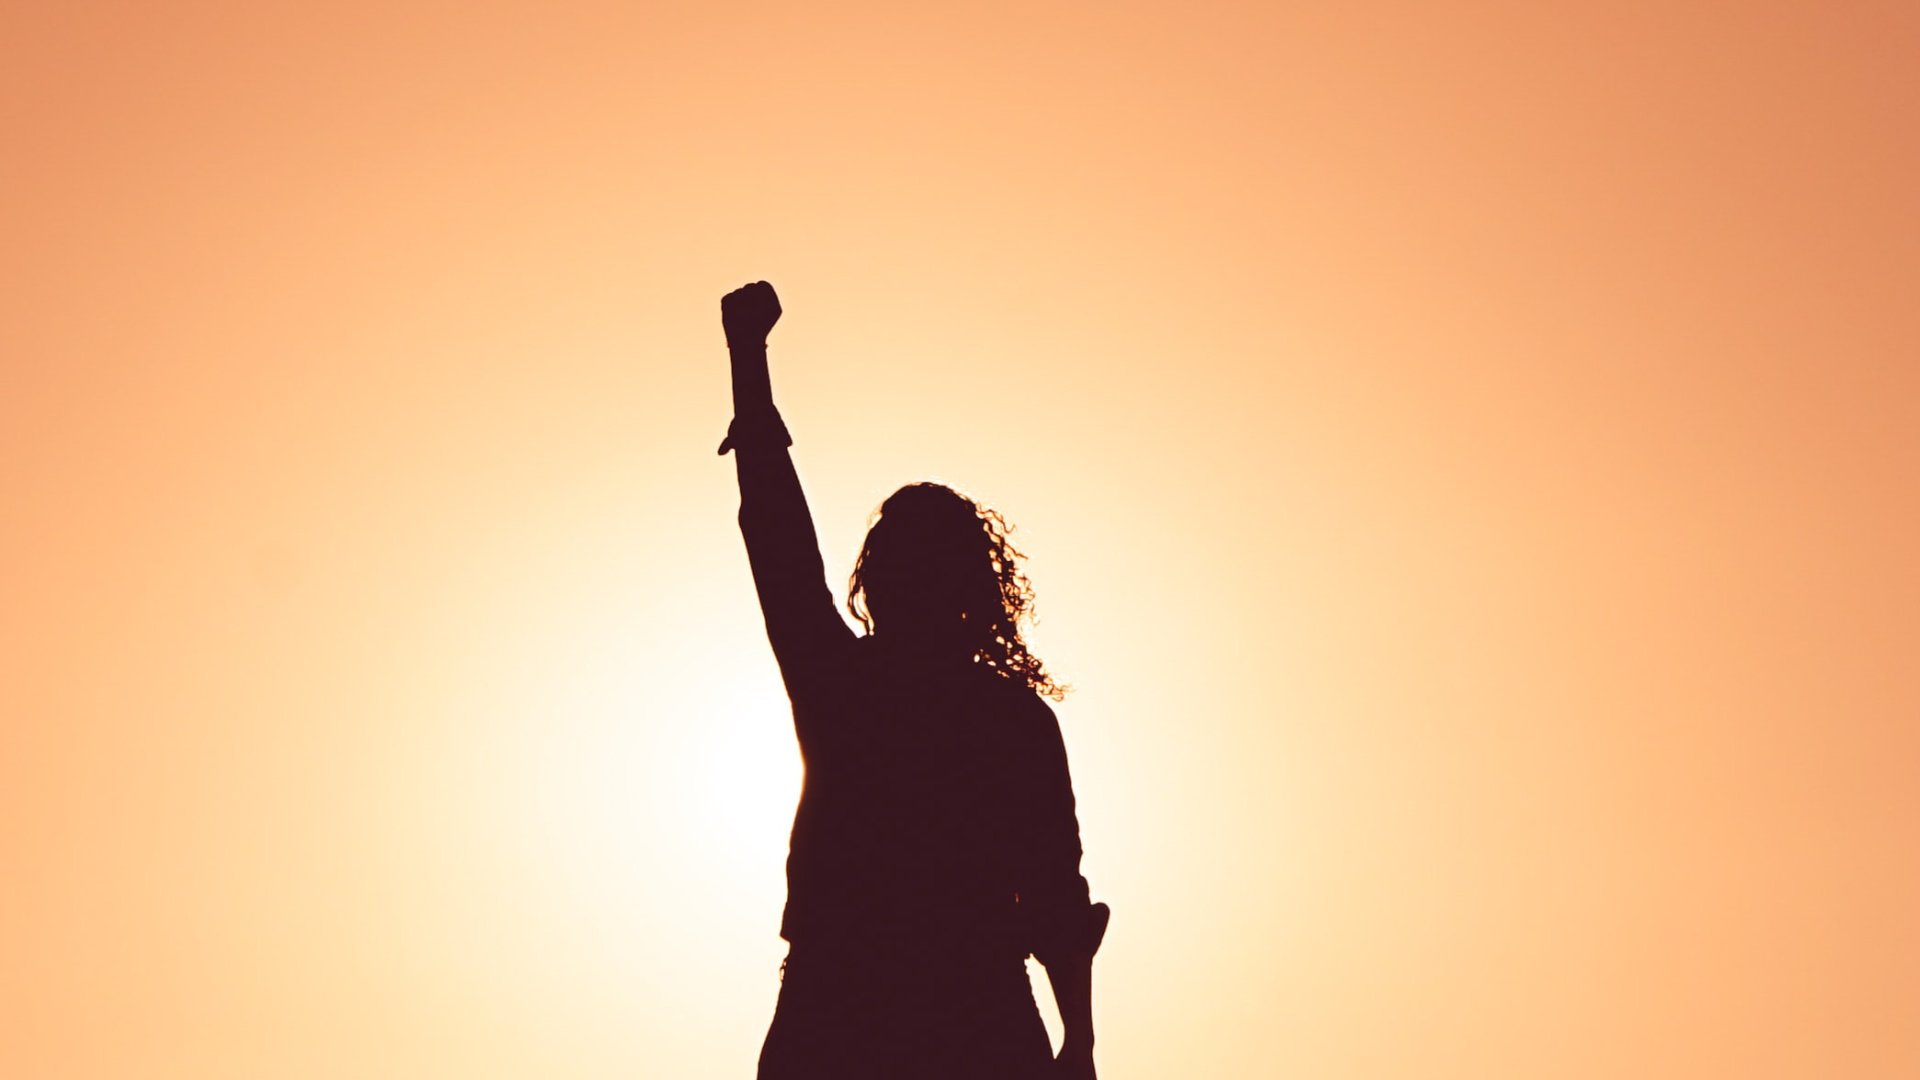 Silhouette of a person holding their fist in the air